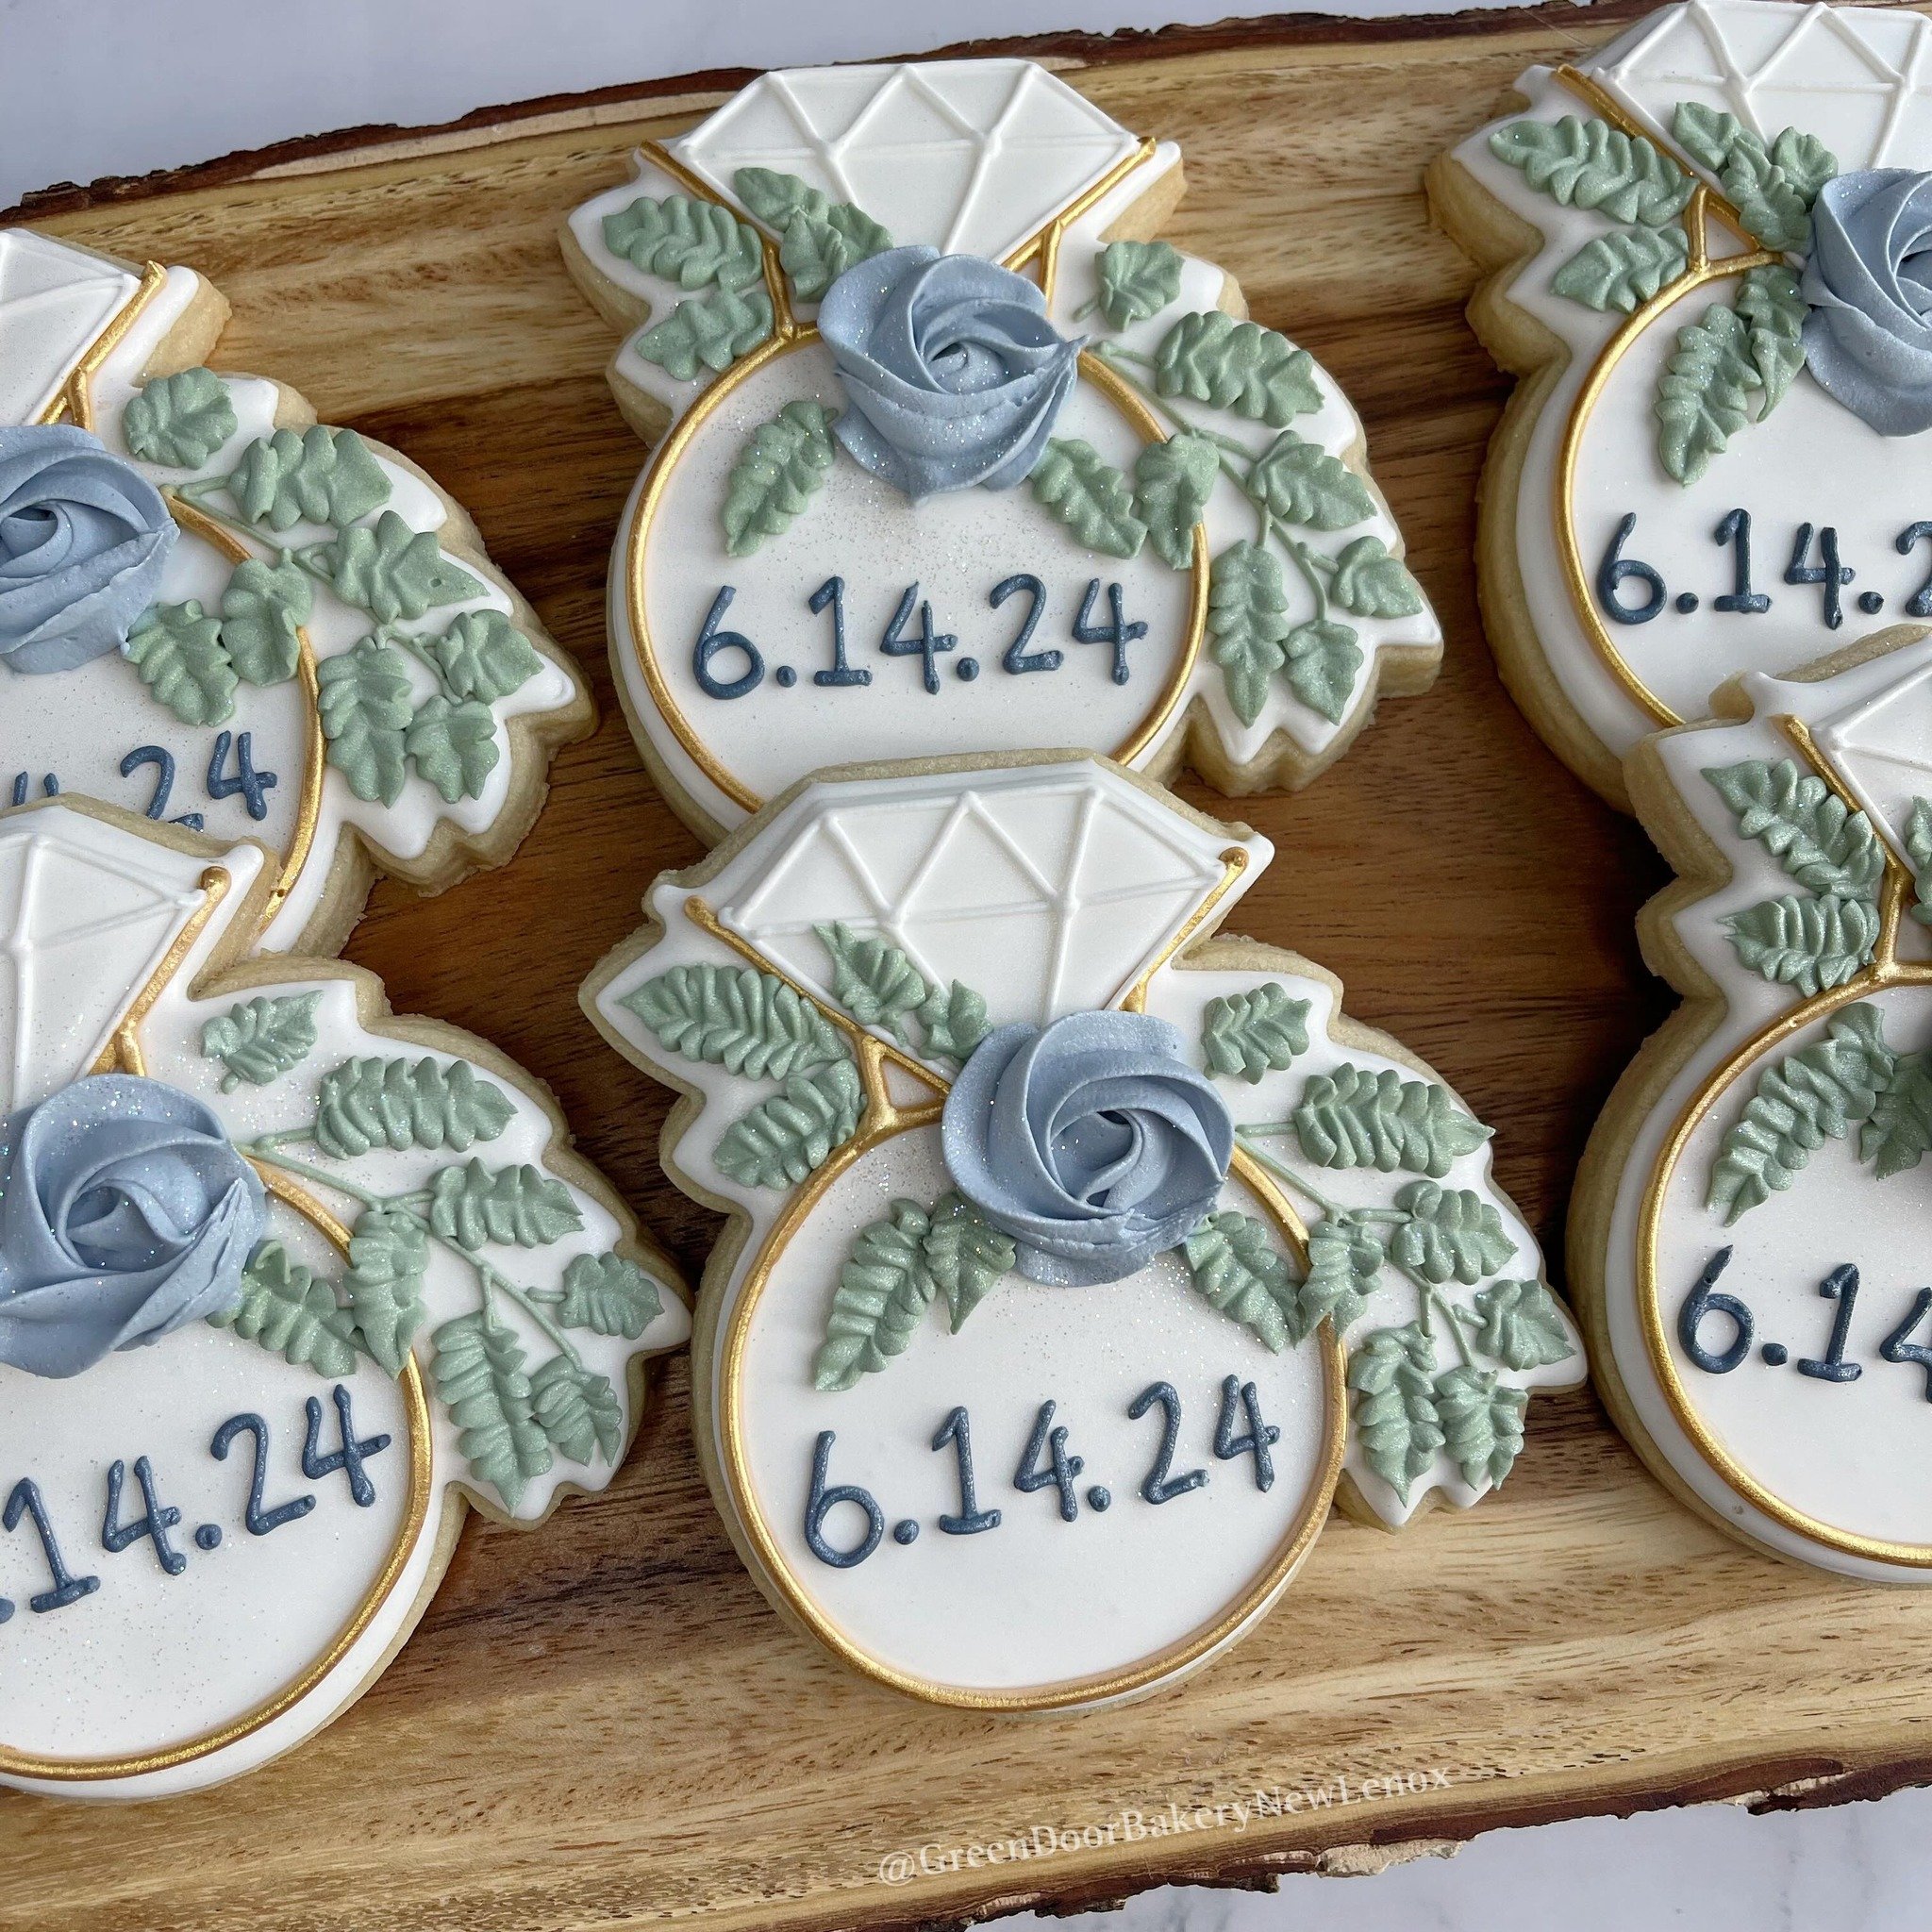 Elegant and delicious favors for a bridal shower. I love the colors they chose 😍 Congrats to the bride and groom! 👰 💍 🎉 

#Greendoorbakerynewlenox #newlenox #newlenoxil #newlenoxillinois #illinois #instacookies #customcookies #sugarcookies #homeb